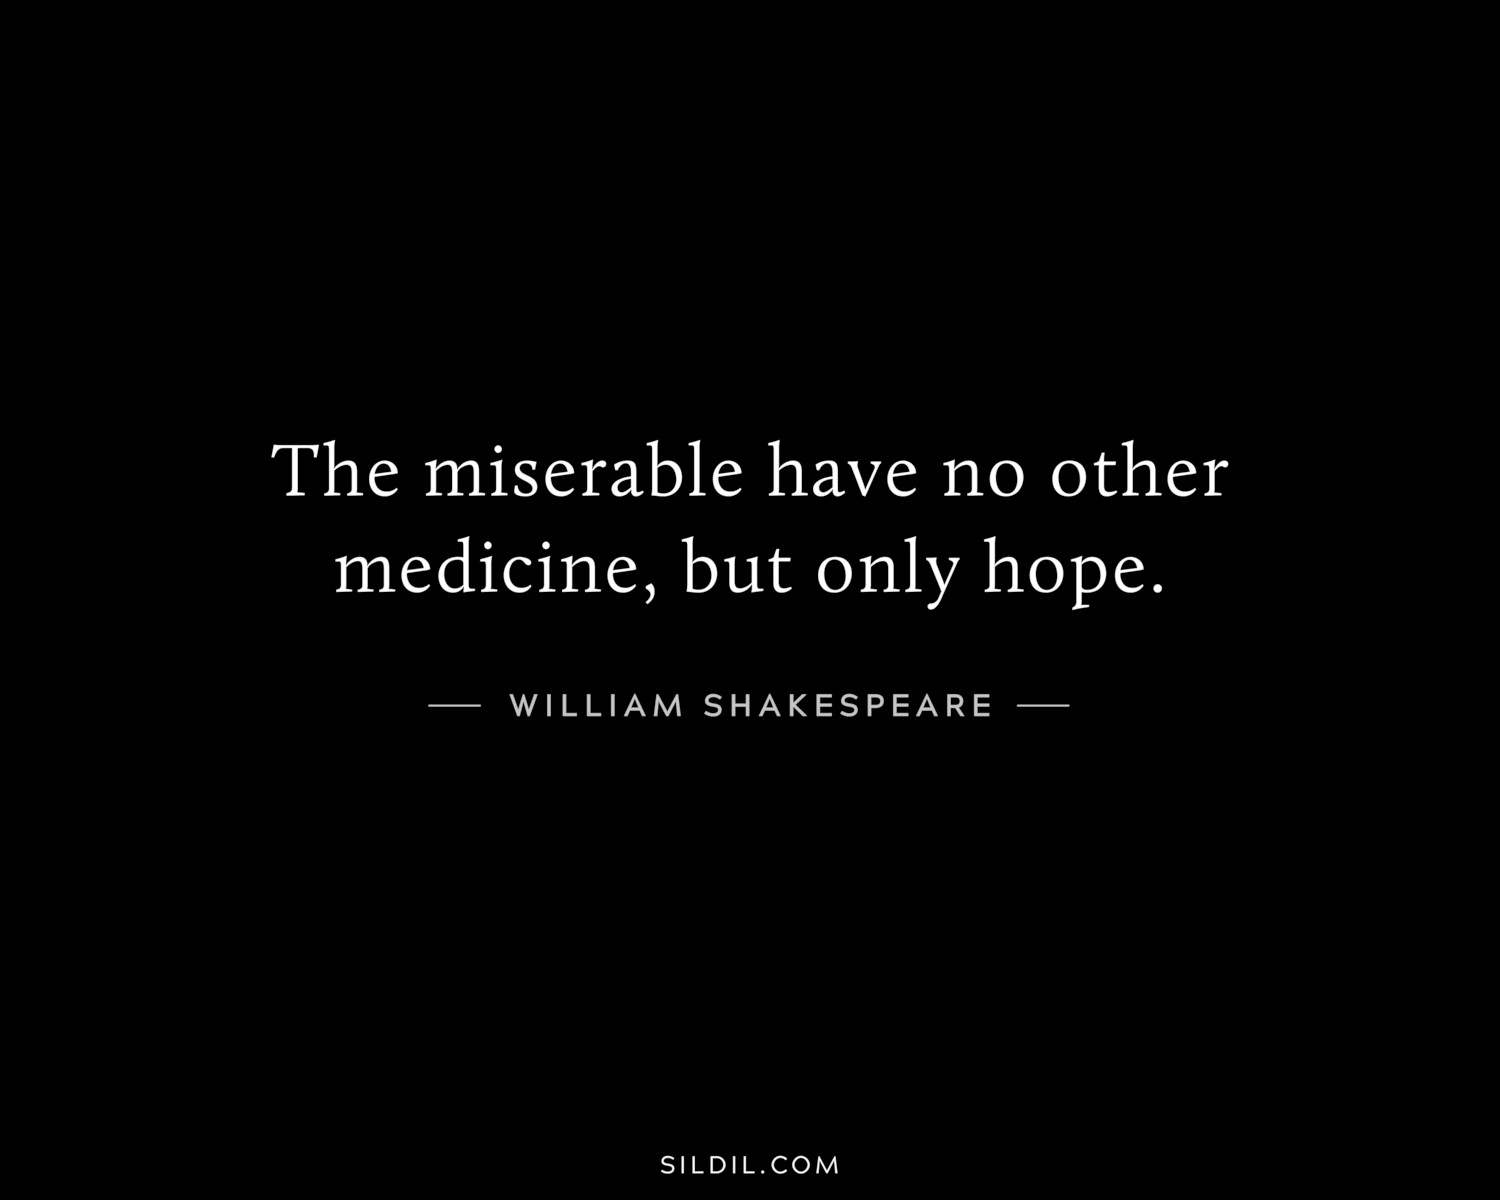 The miserable have no other medicine, but only hope.